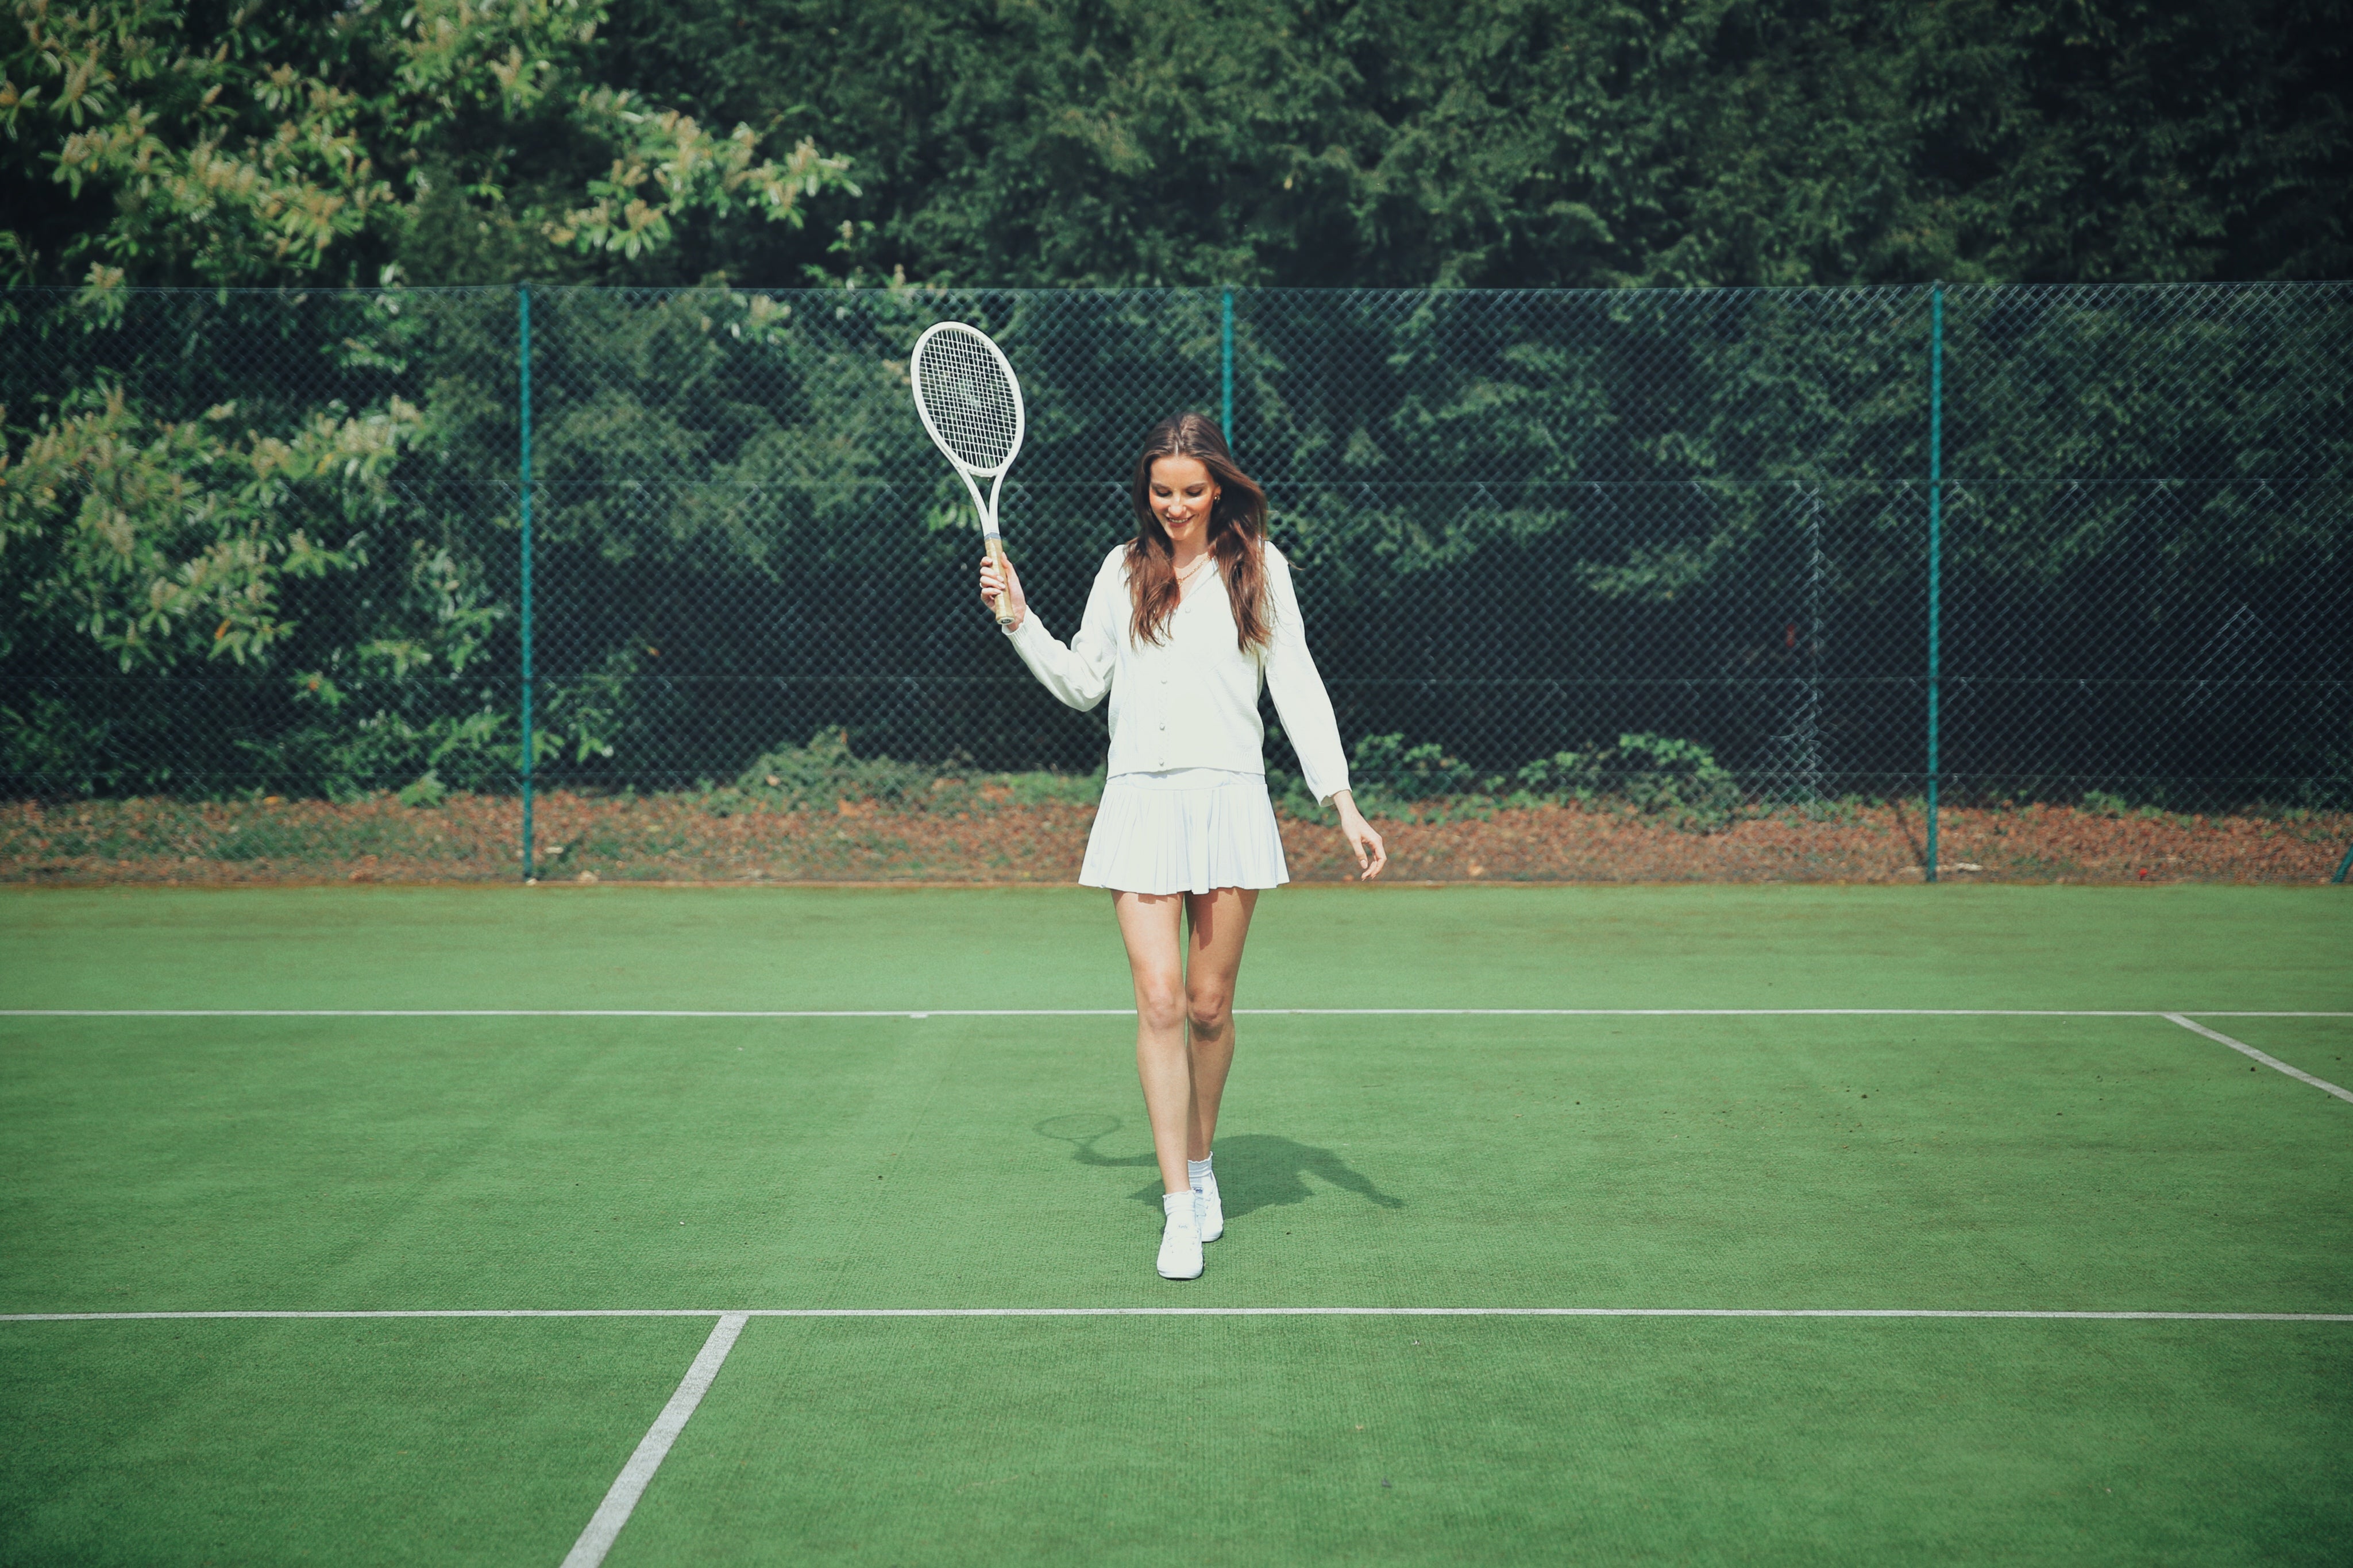 Game, Set, Life: The Science Behind Tennis and Longevity